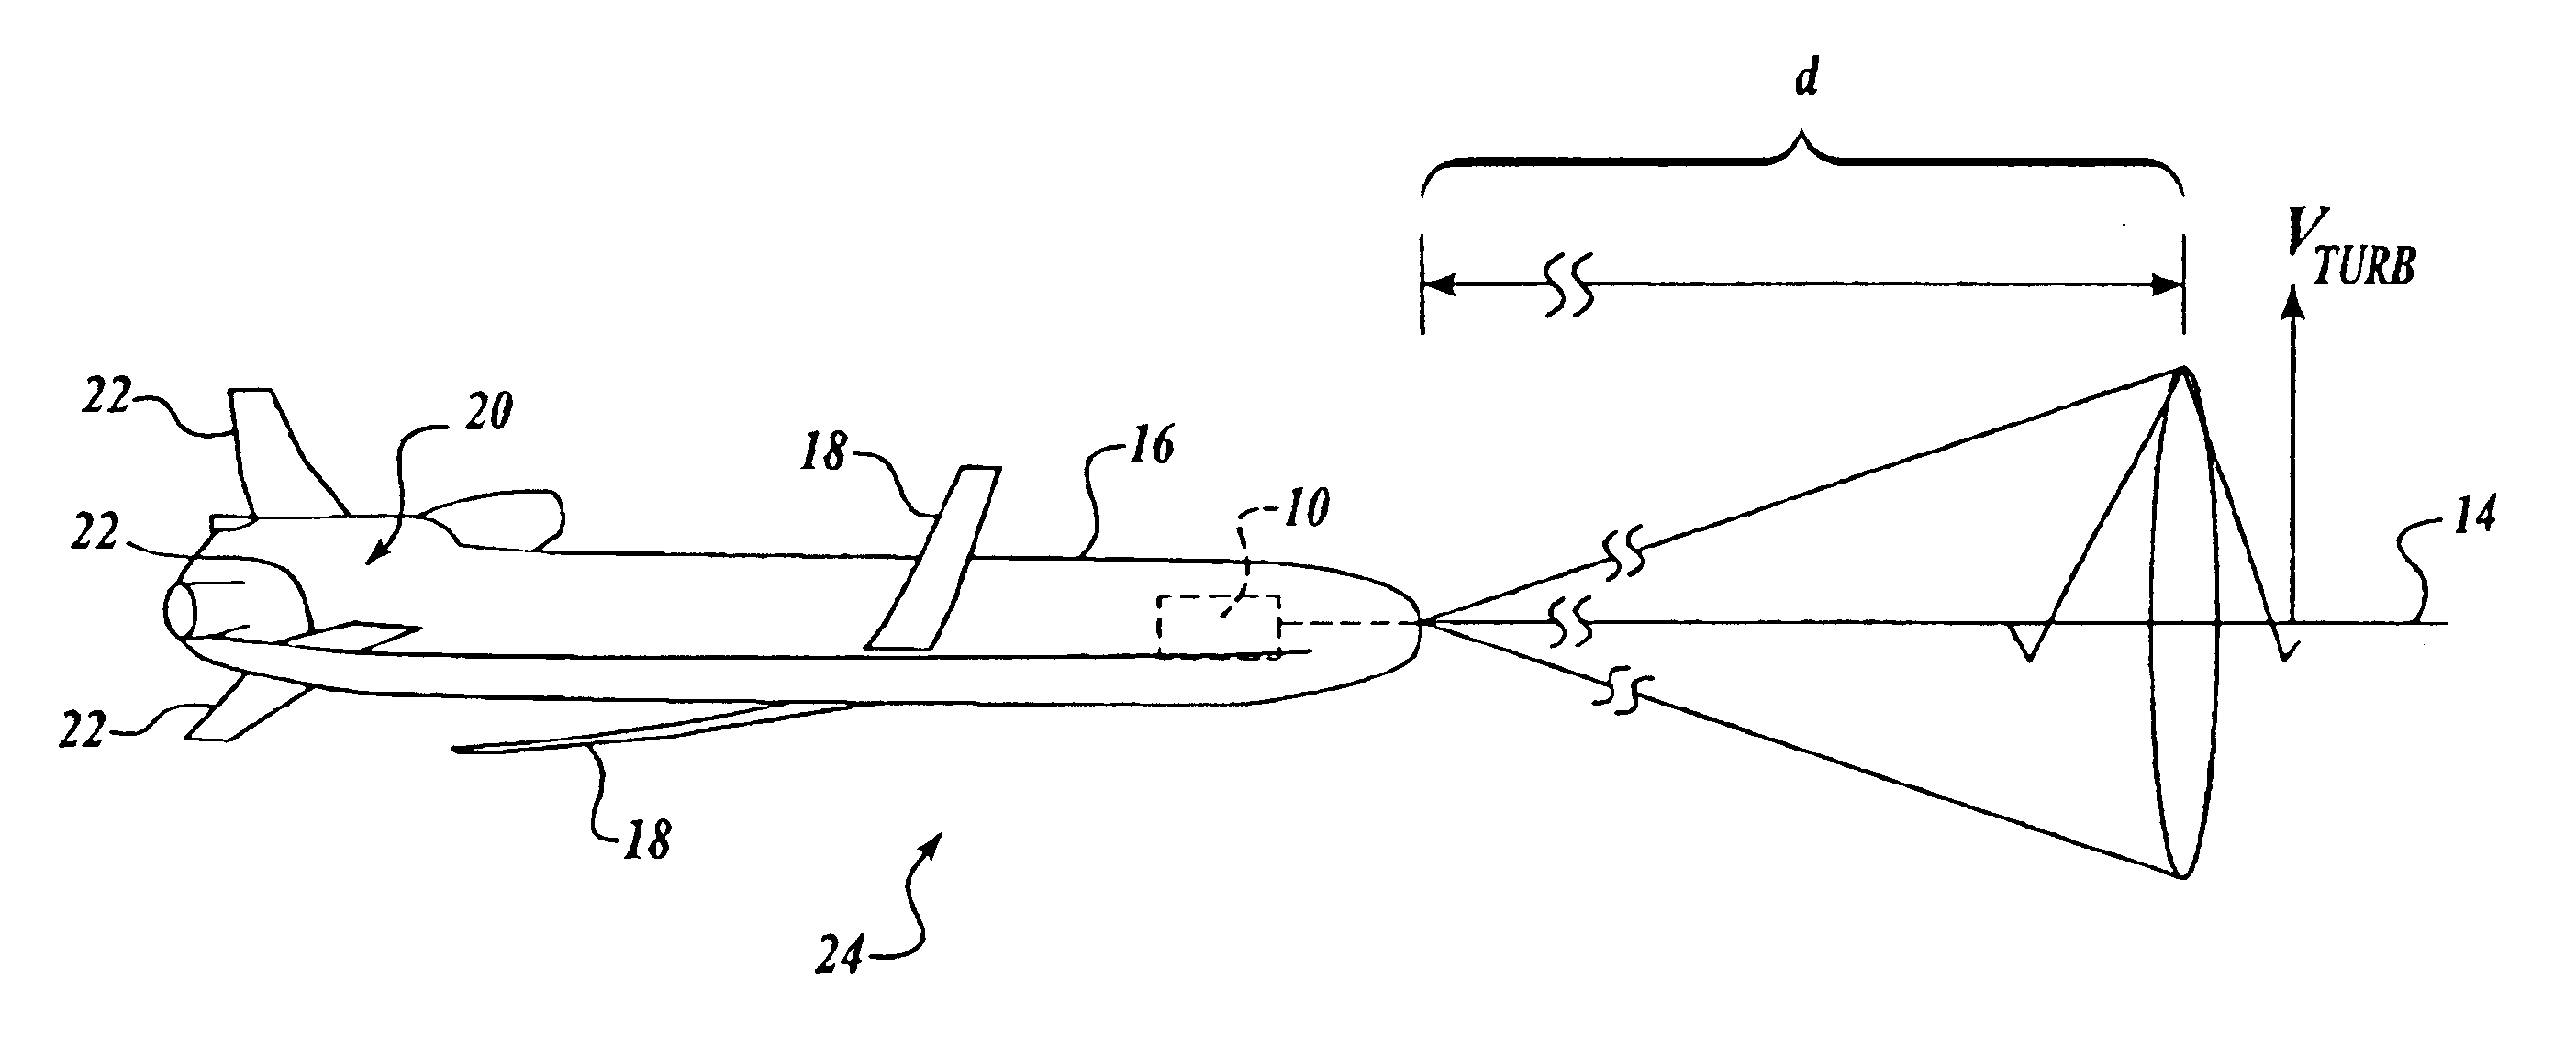 Proactive optical trajectory following system